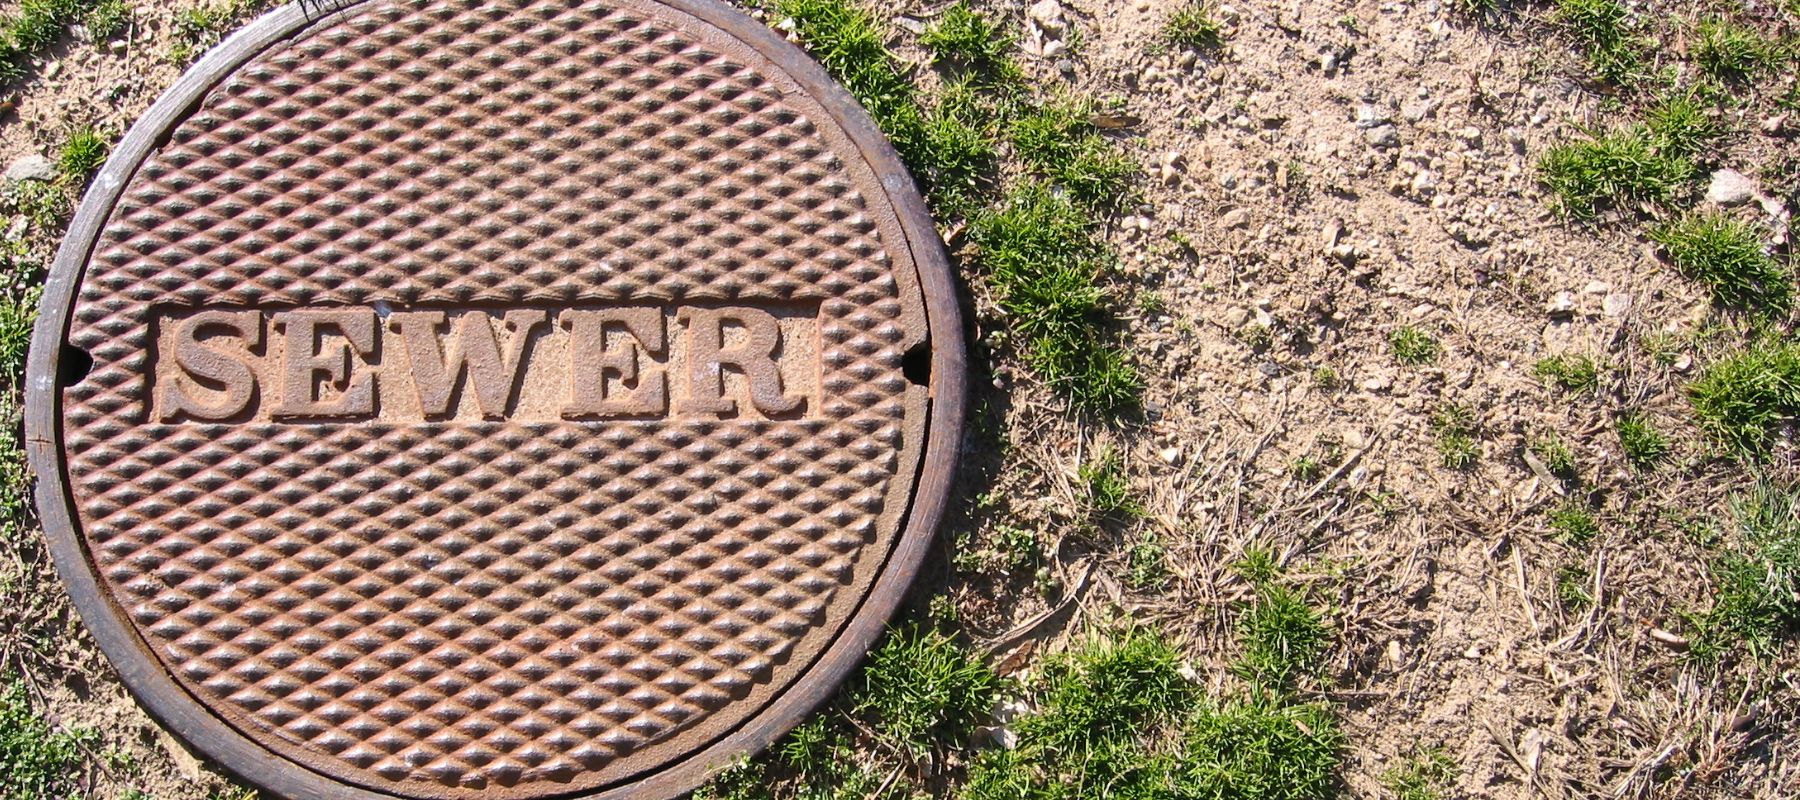 sewer manhole cover in a yard